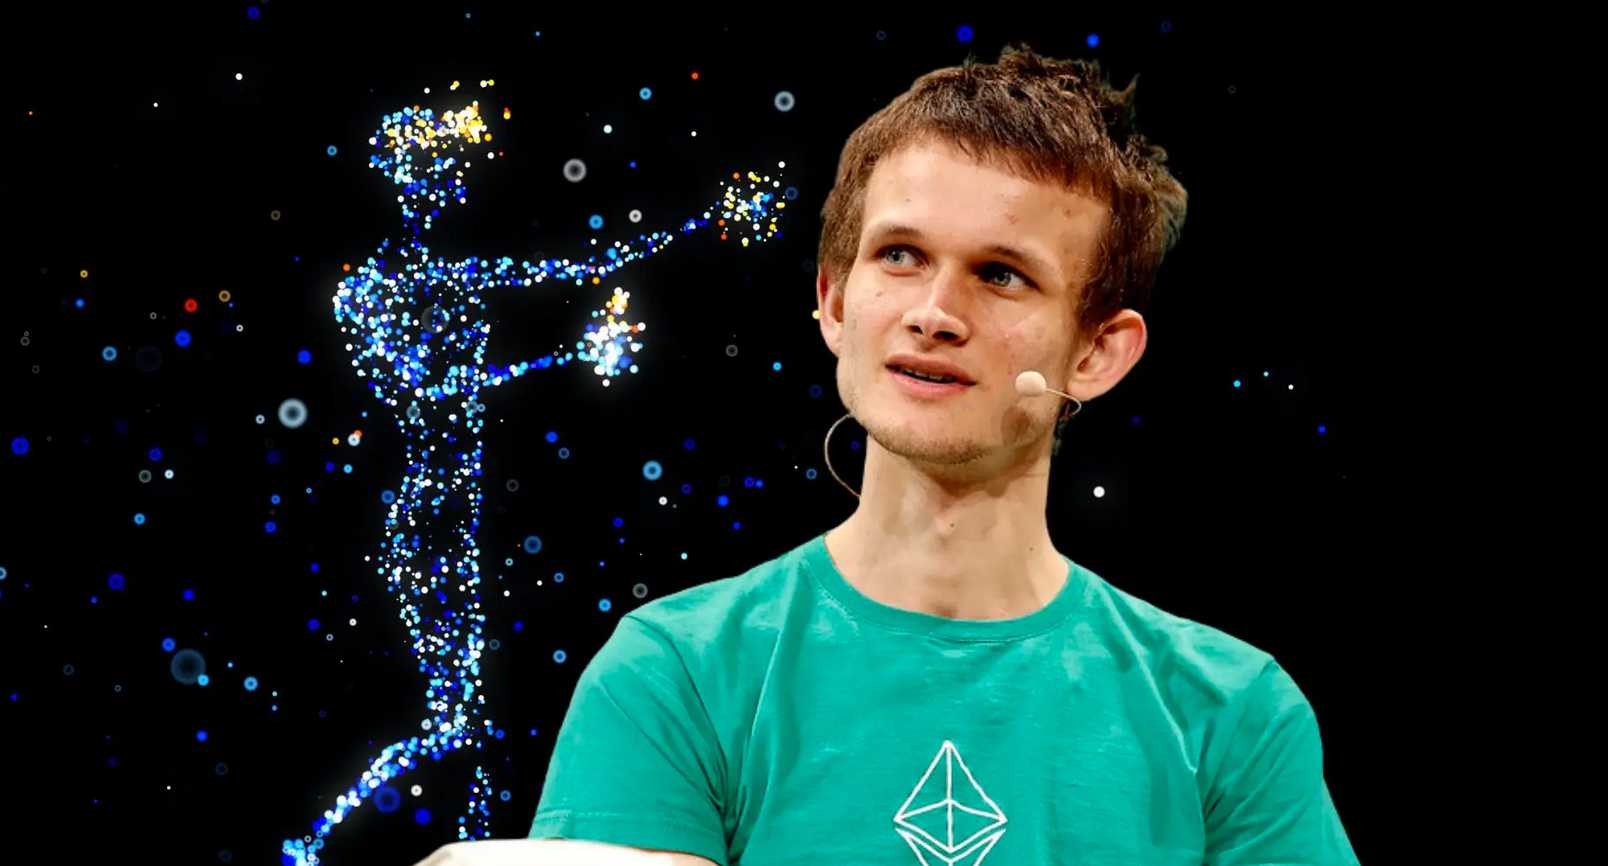 Ethereum Co-Founder Vitalik Buterin: Millions Of People Have Crypto Wallets To Trade Monkey Pictures